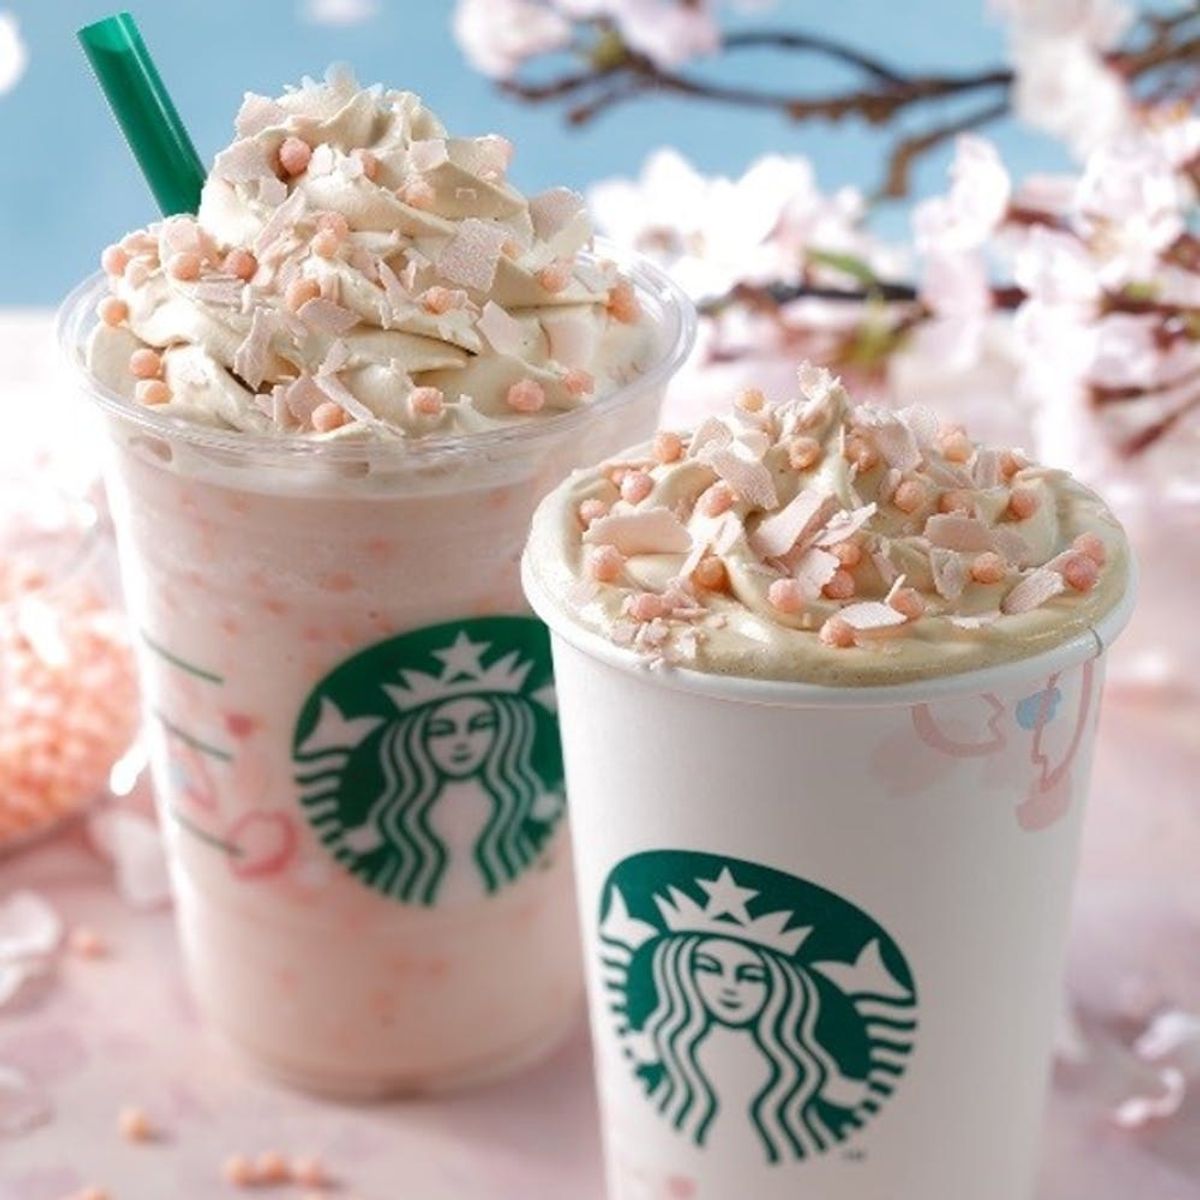 Starbucks Sakura Blossom Beverages Are As Gorgeous As Cherry Blossoms in Spring